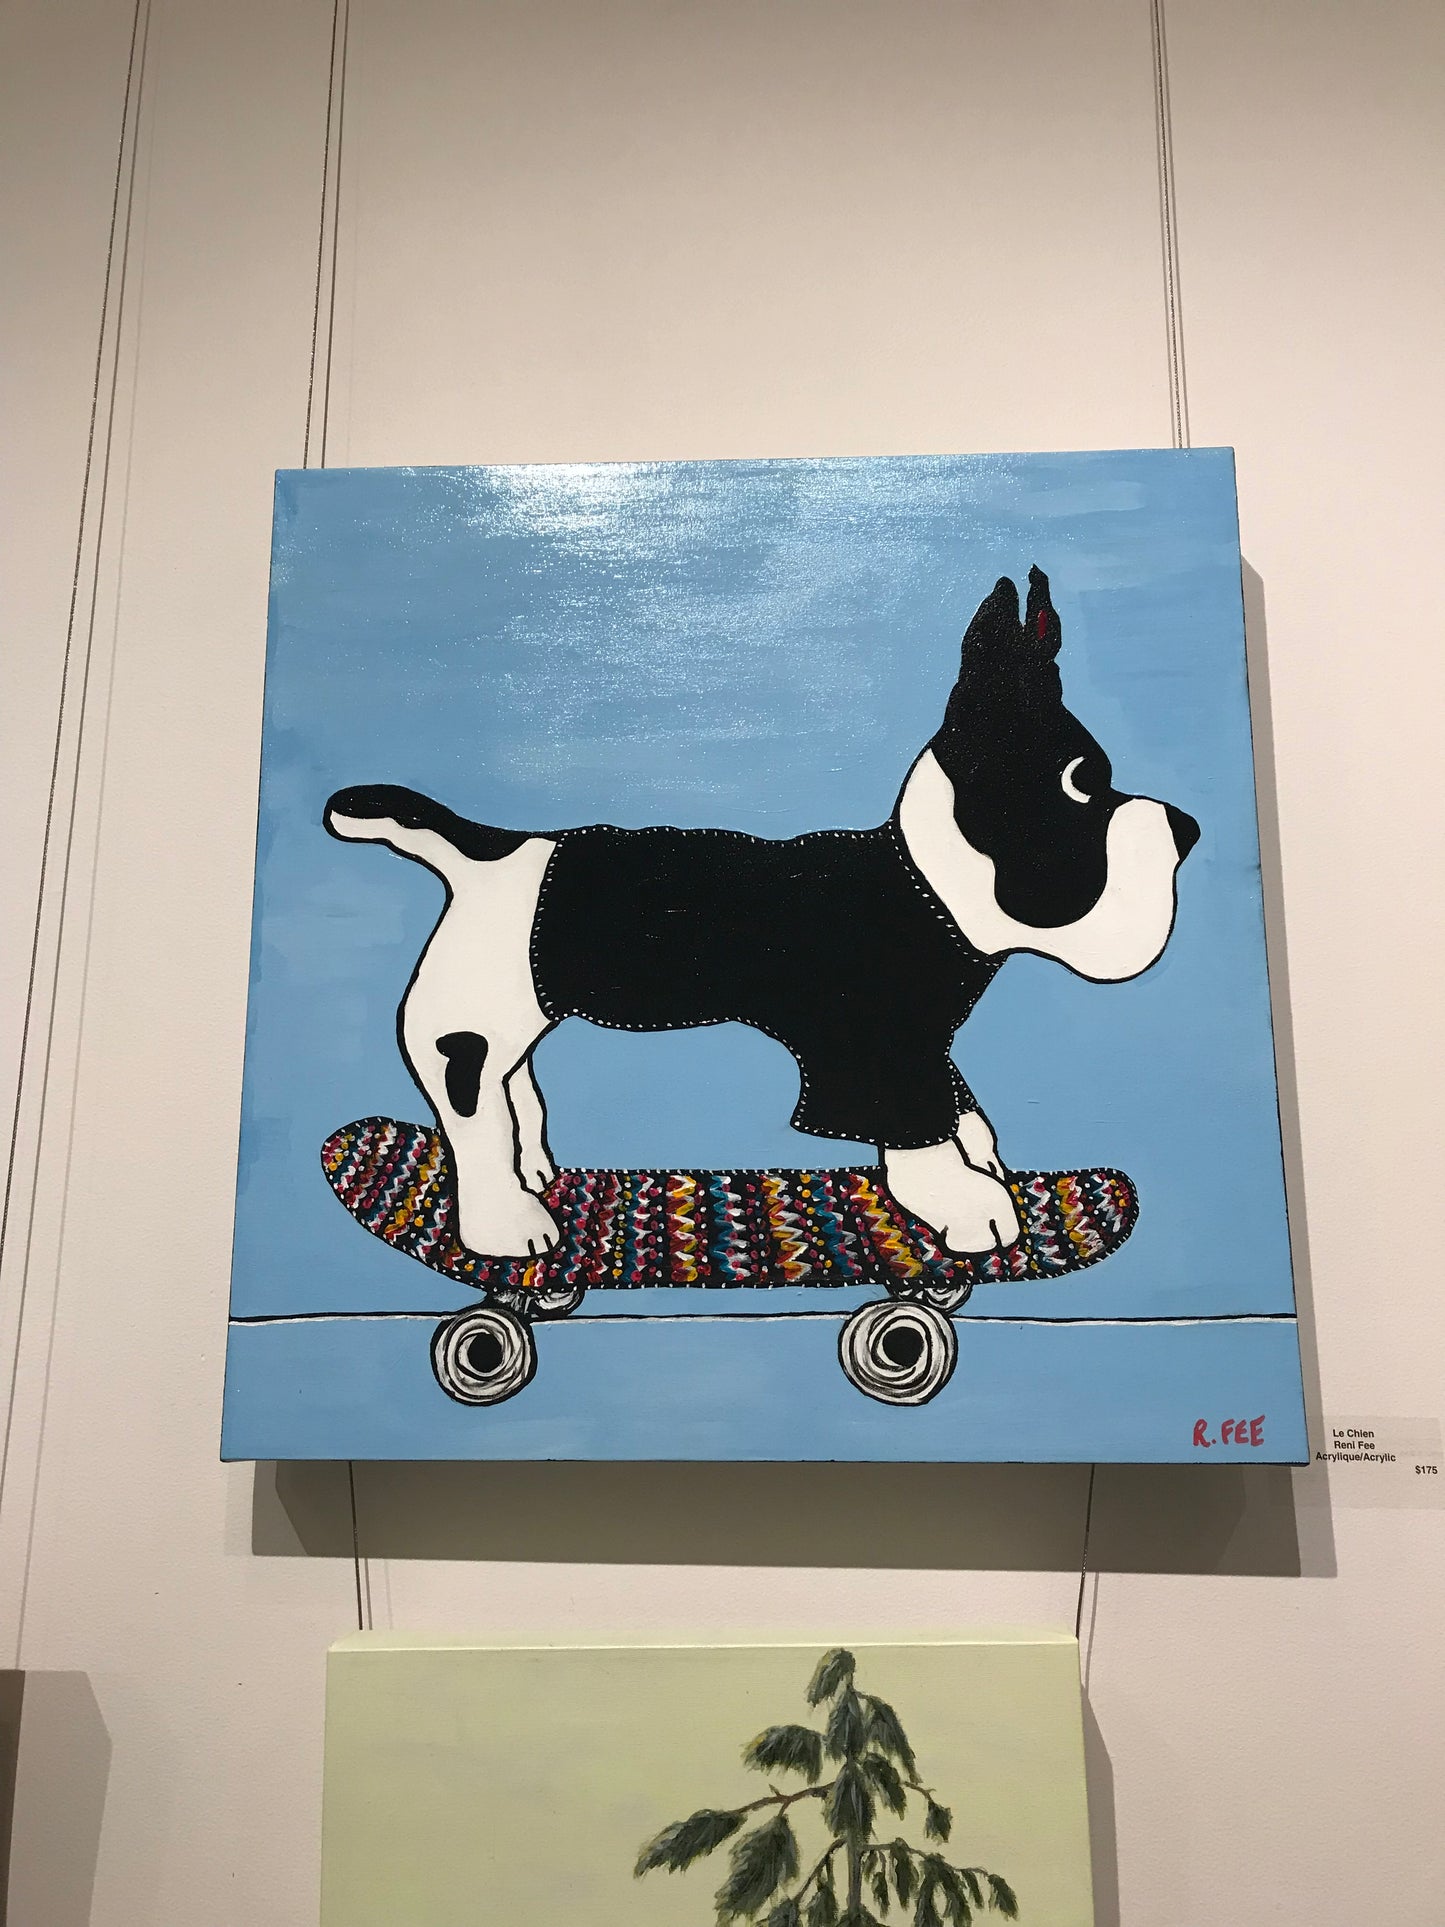 Le Chien - Original Artwork by Reni Fee hanging in a gallery.